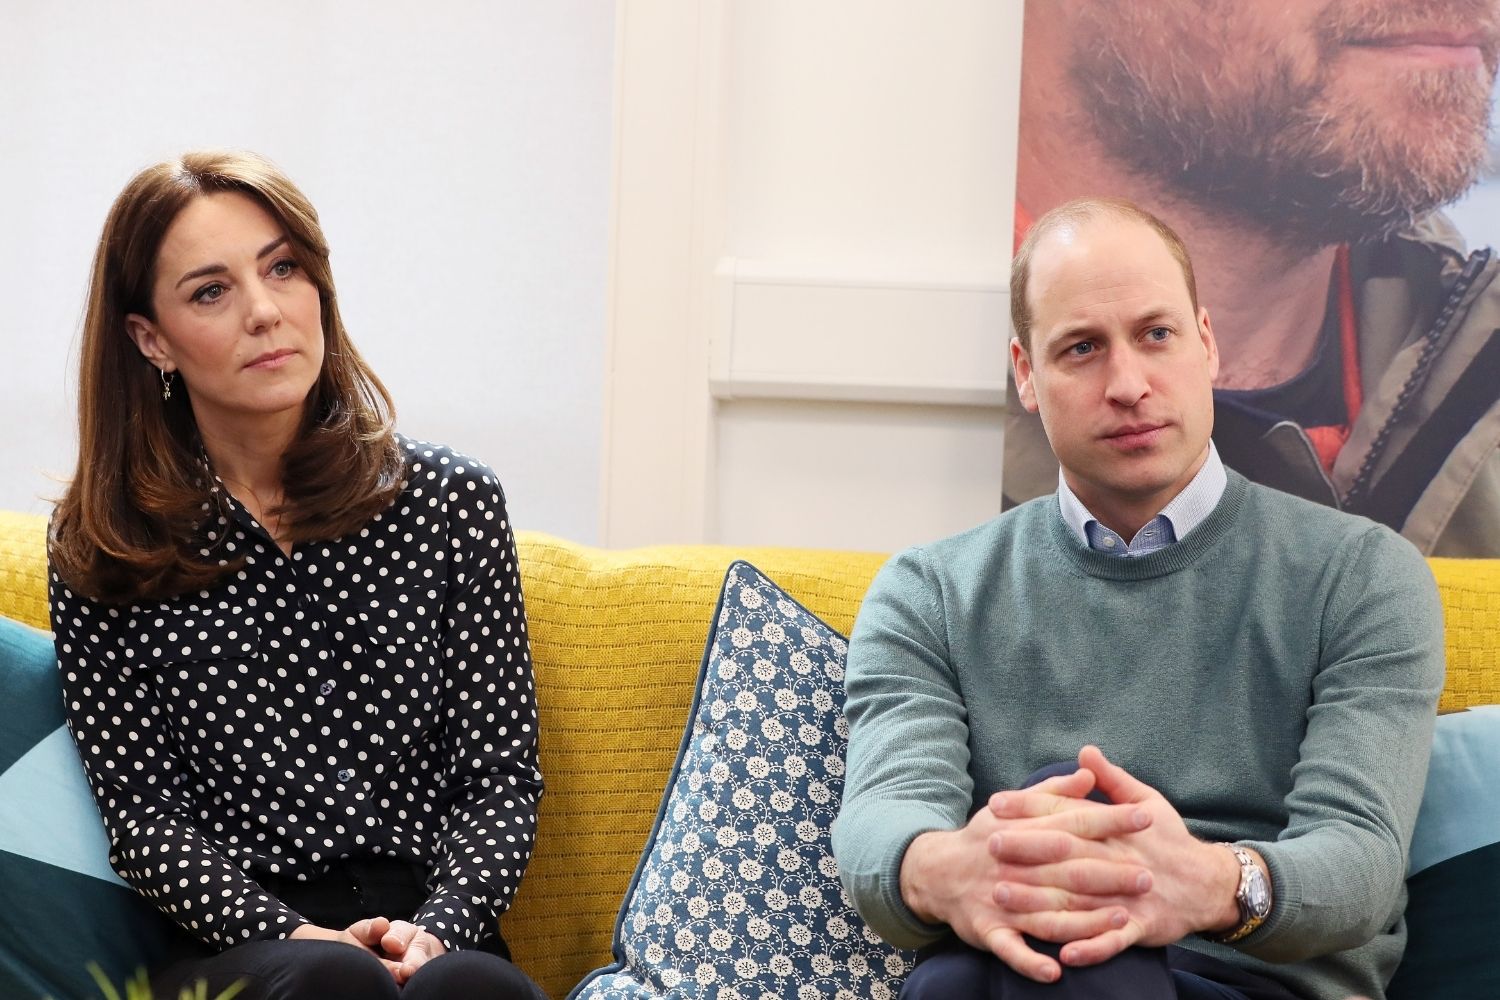 will kate interview